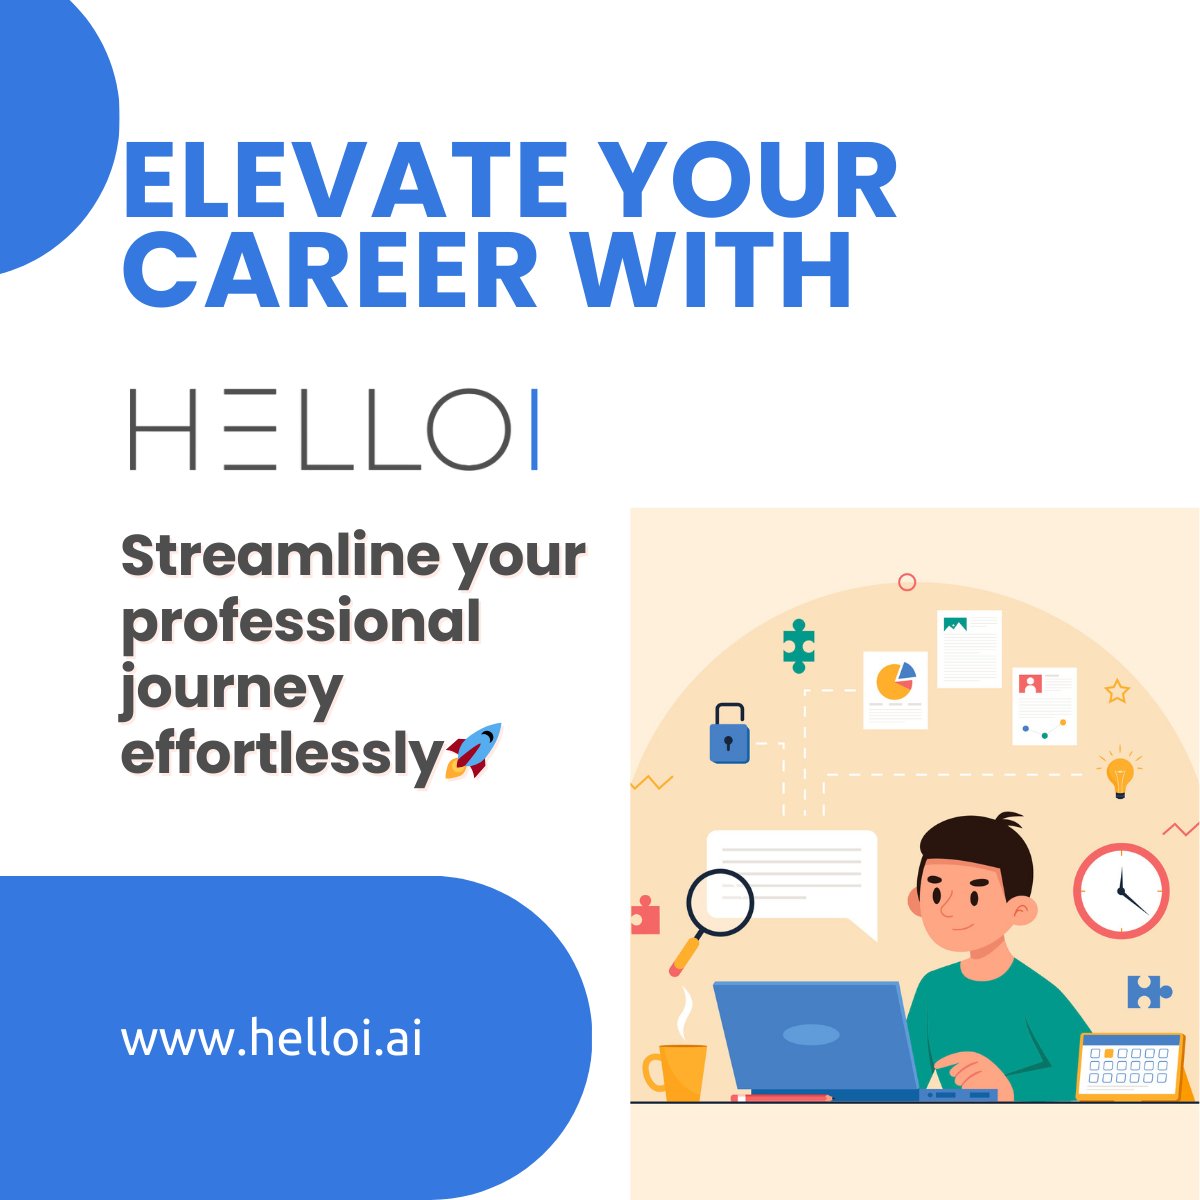 Elevate your career effortlessly with Hello I! 🚀
Our AI-powered platform streamlines profile updates, ensuring your skills shine. ⭐
Don't fall behind, embrace the future of career advancement now 👉 helloi.ai
#helloi #CareerDevelopment #ProfessionalGrowth